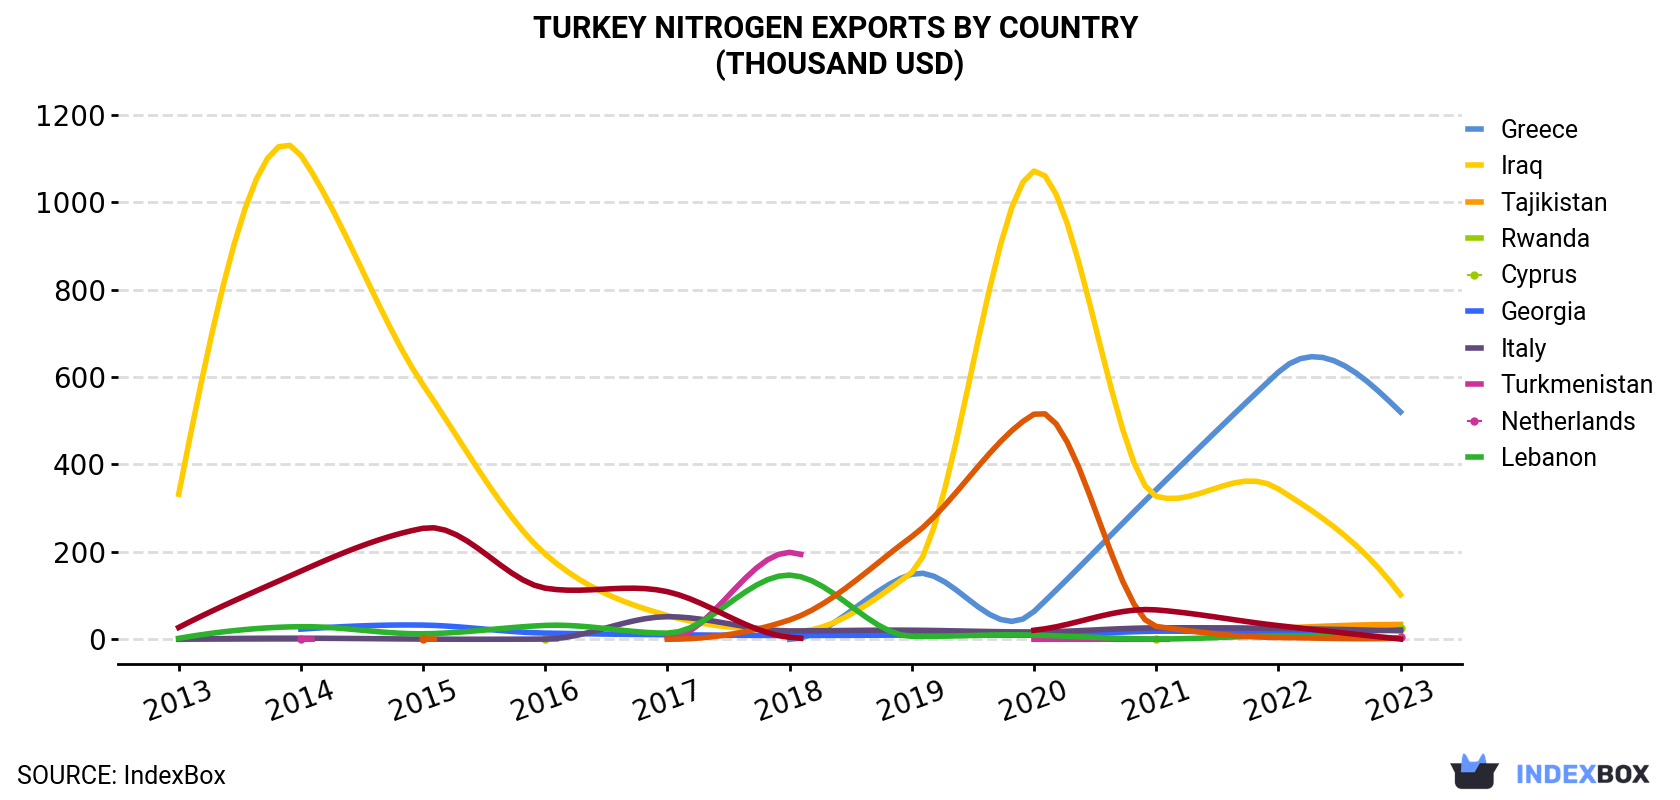 Turkey Nitrogen Exports By Country (Thousand USD)